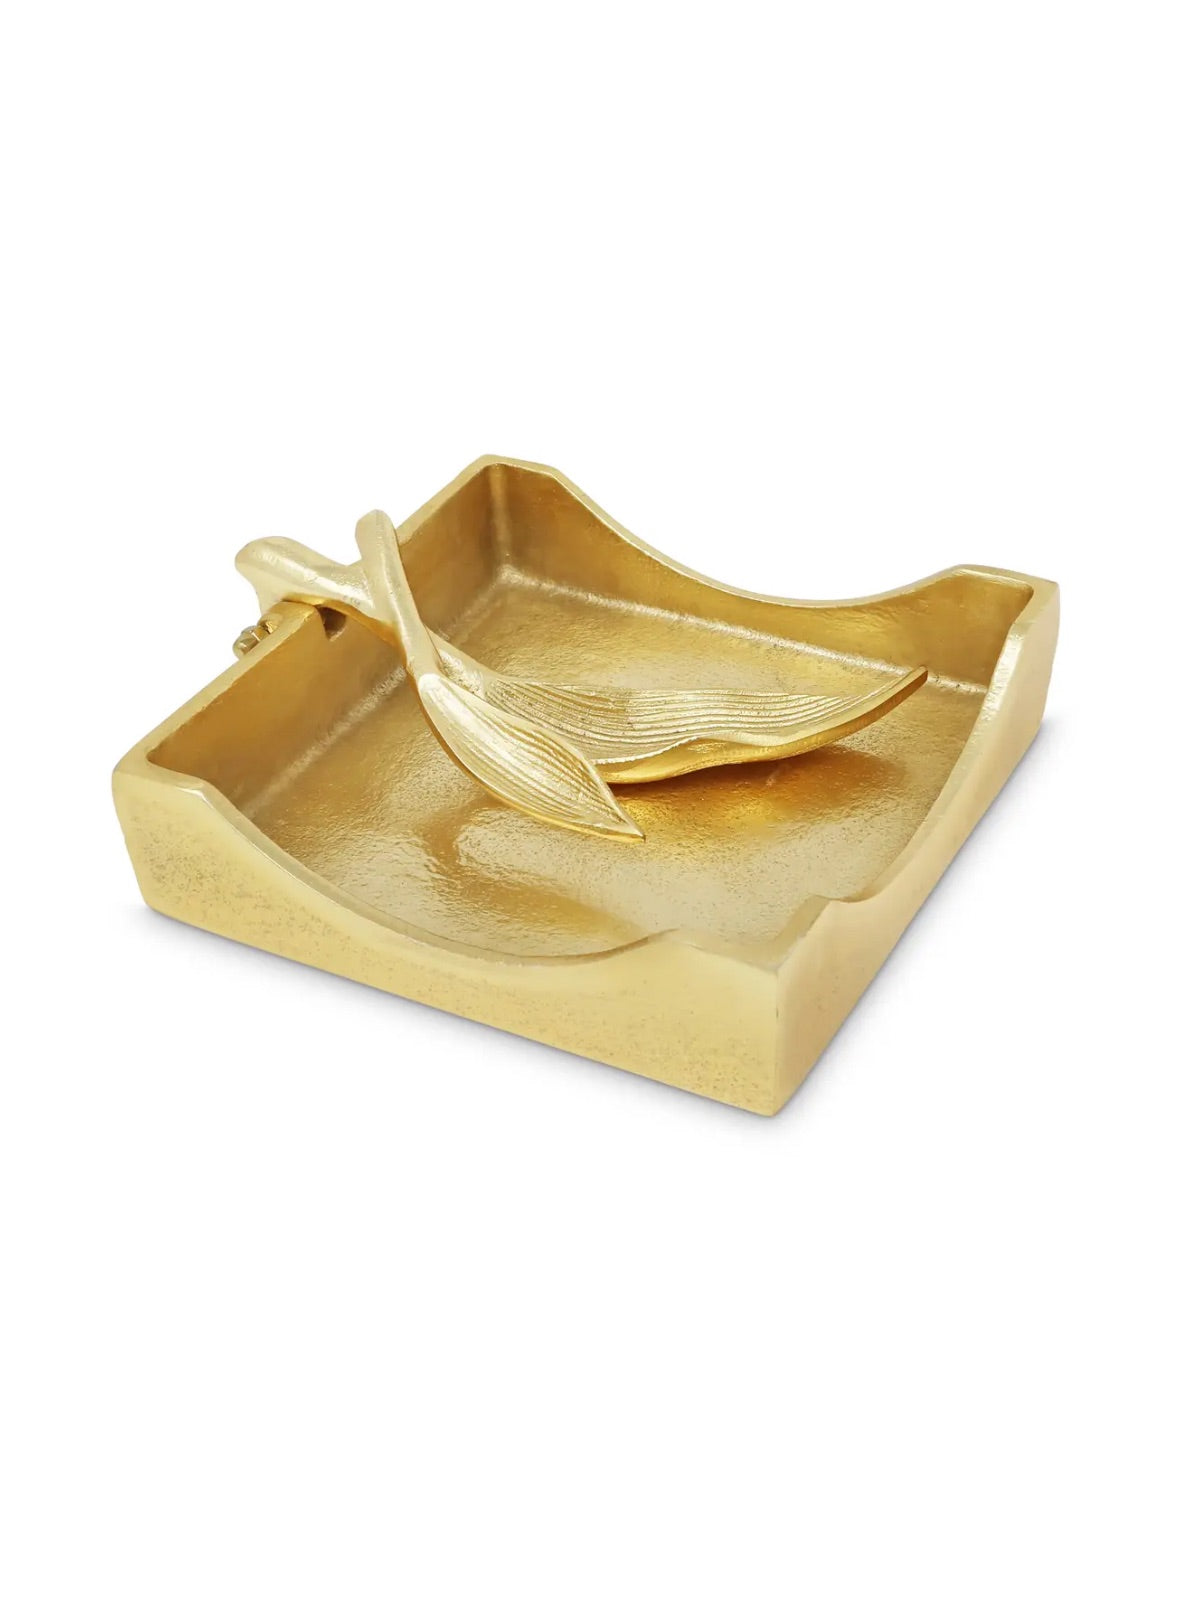 Stainless Steel Gold Square Napkin Holder with Luxury Leaf Tong.